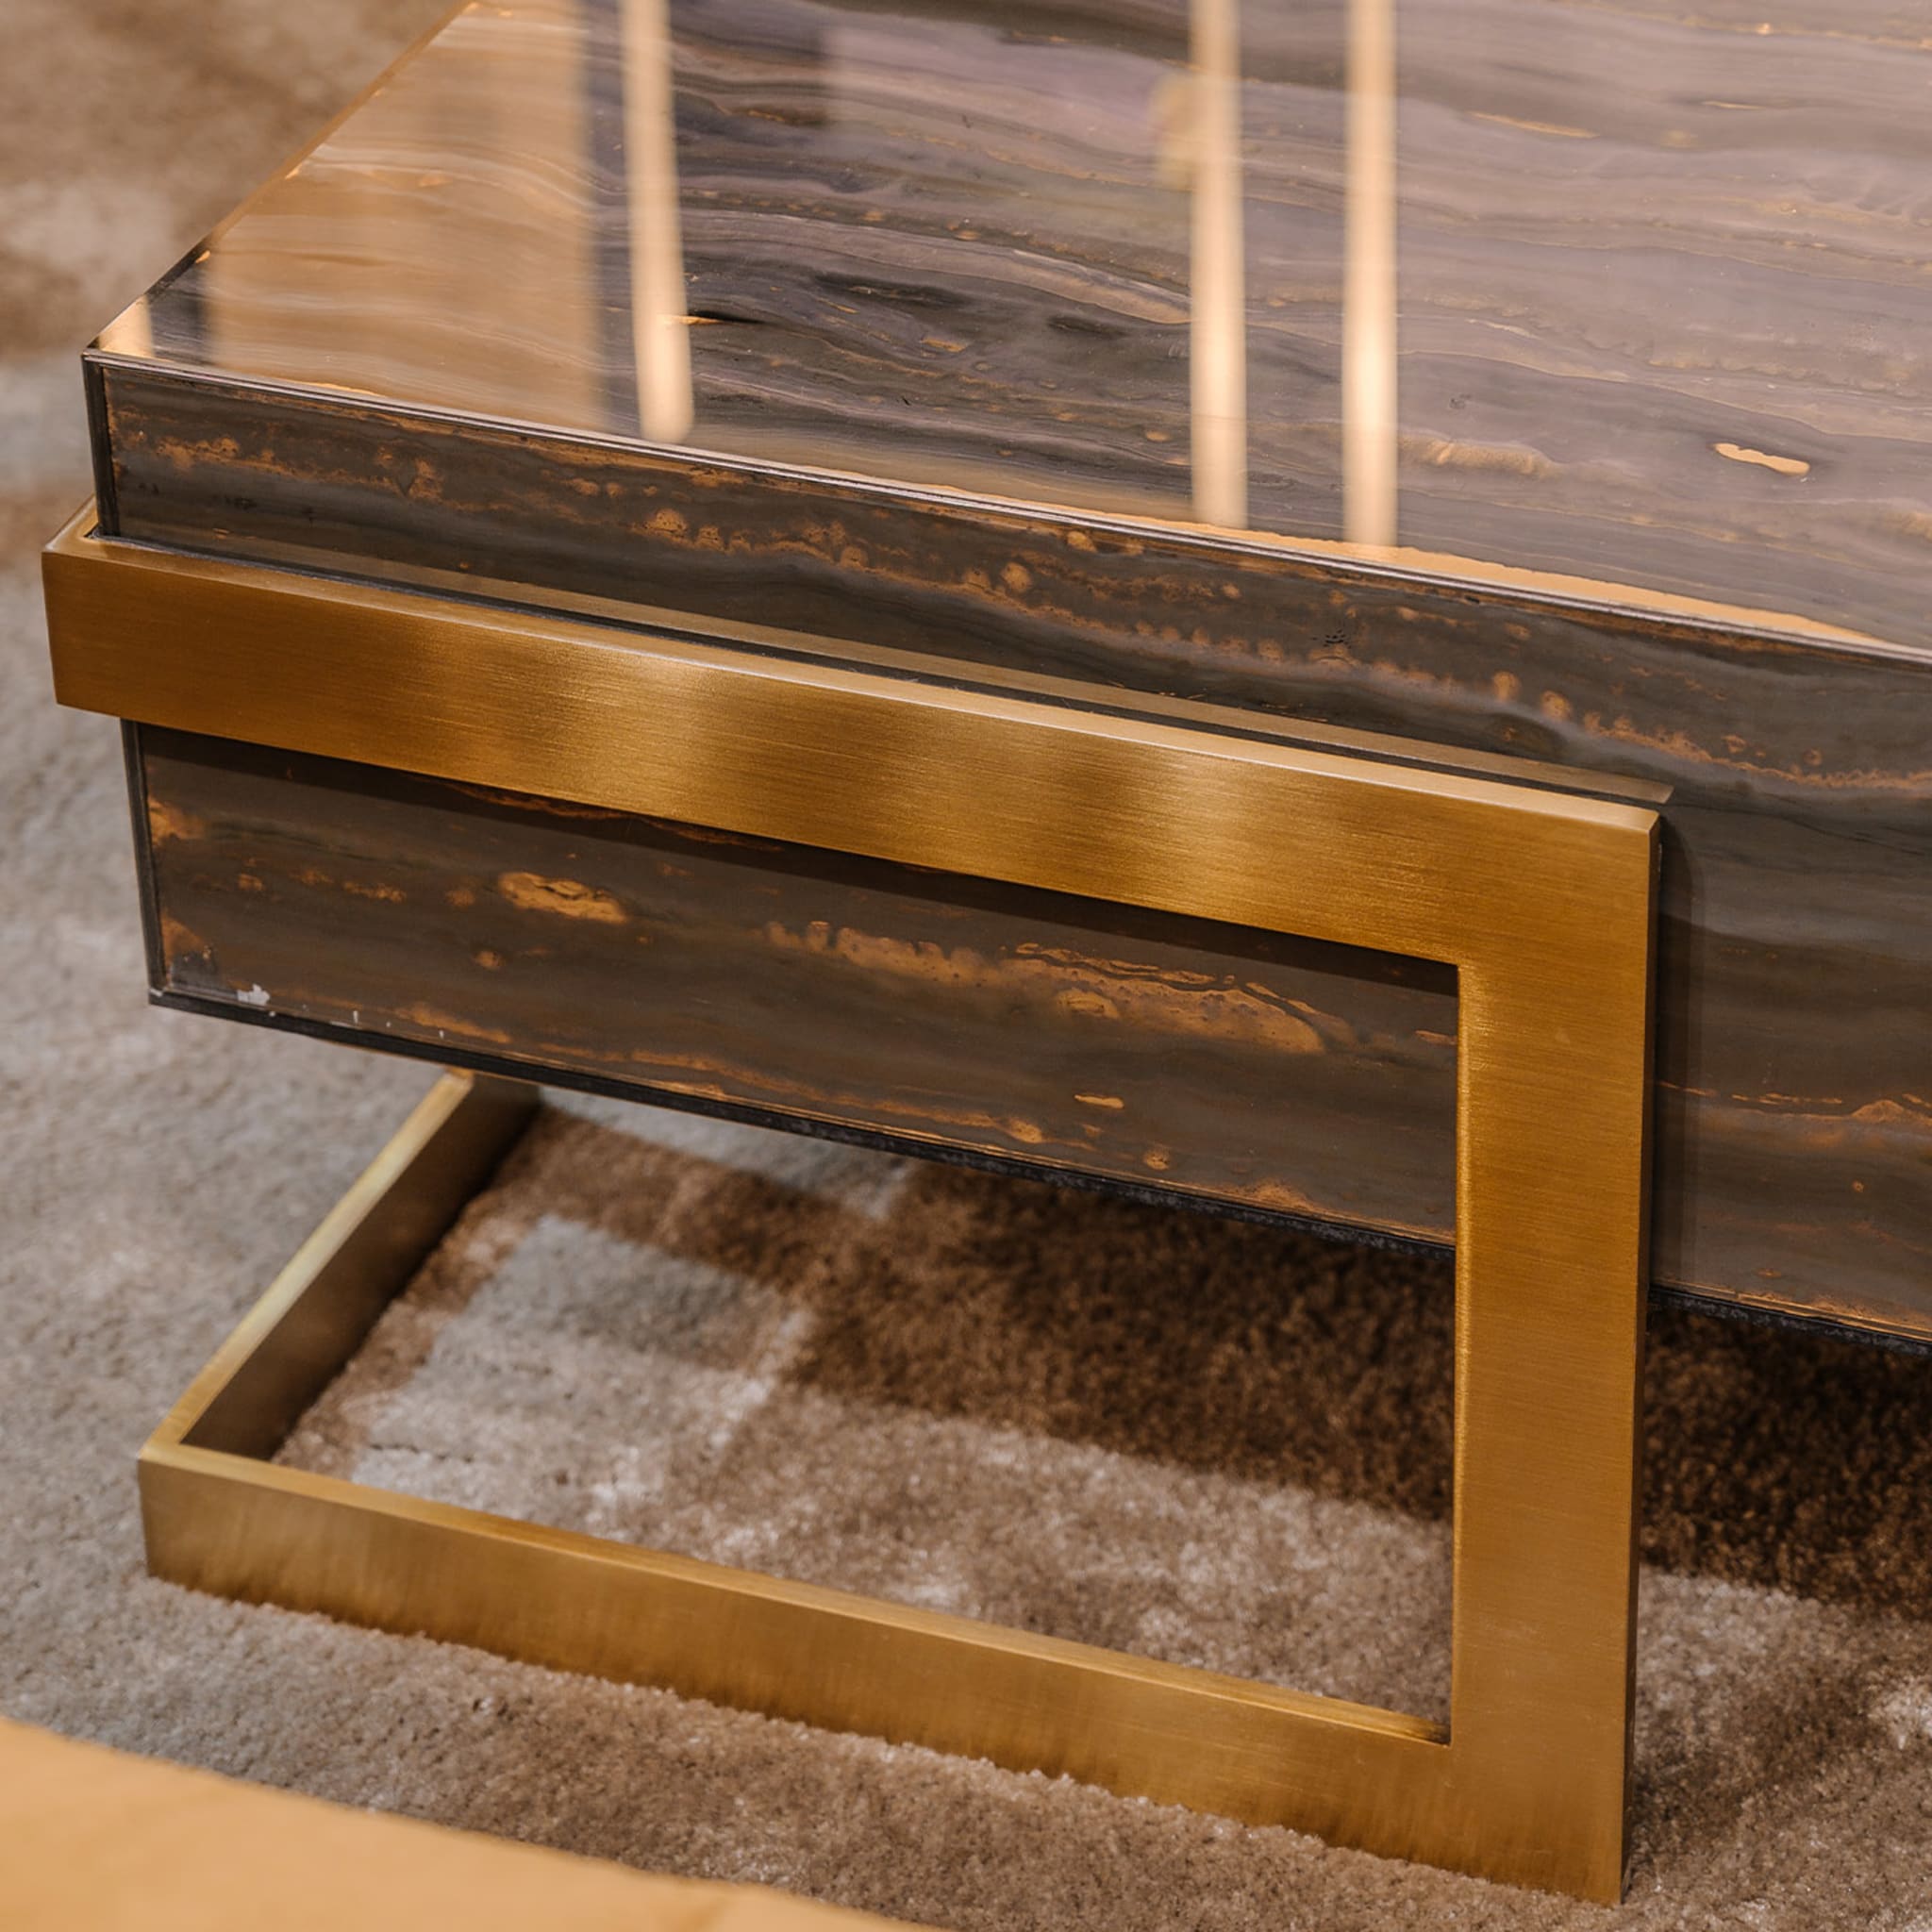 Holbrook Coffee Table by Giannella Ventura - Alternative view 1